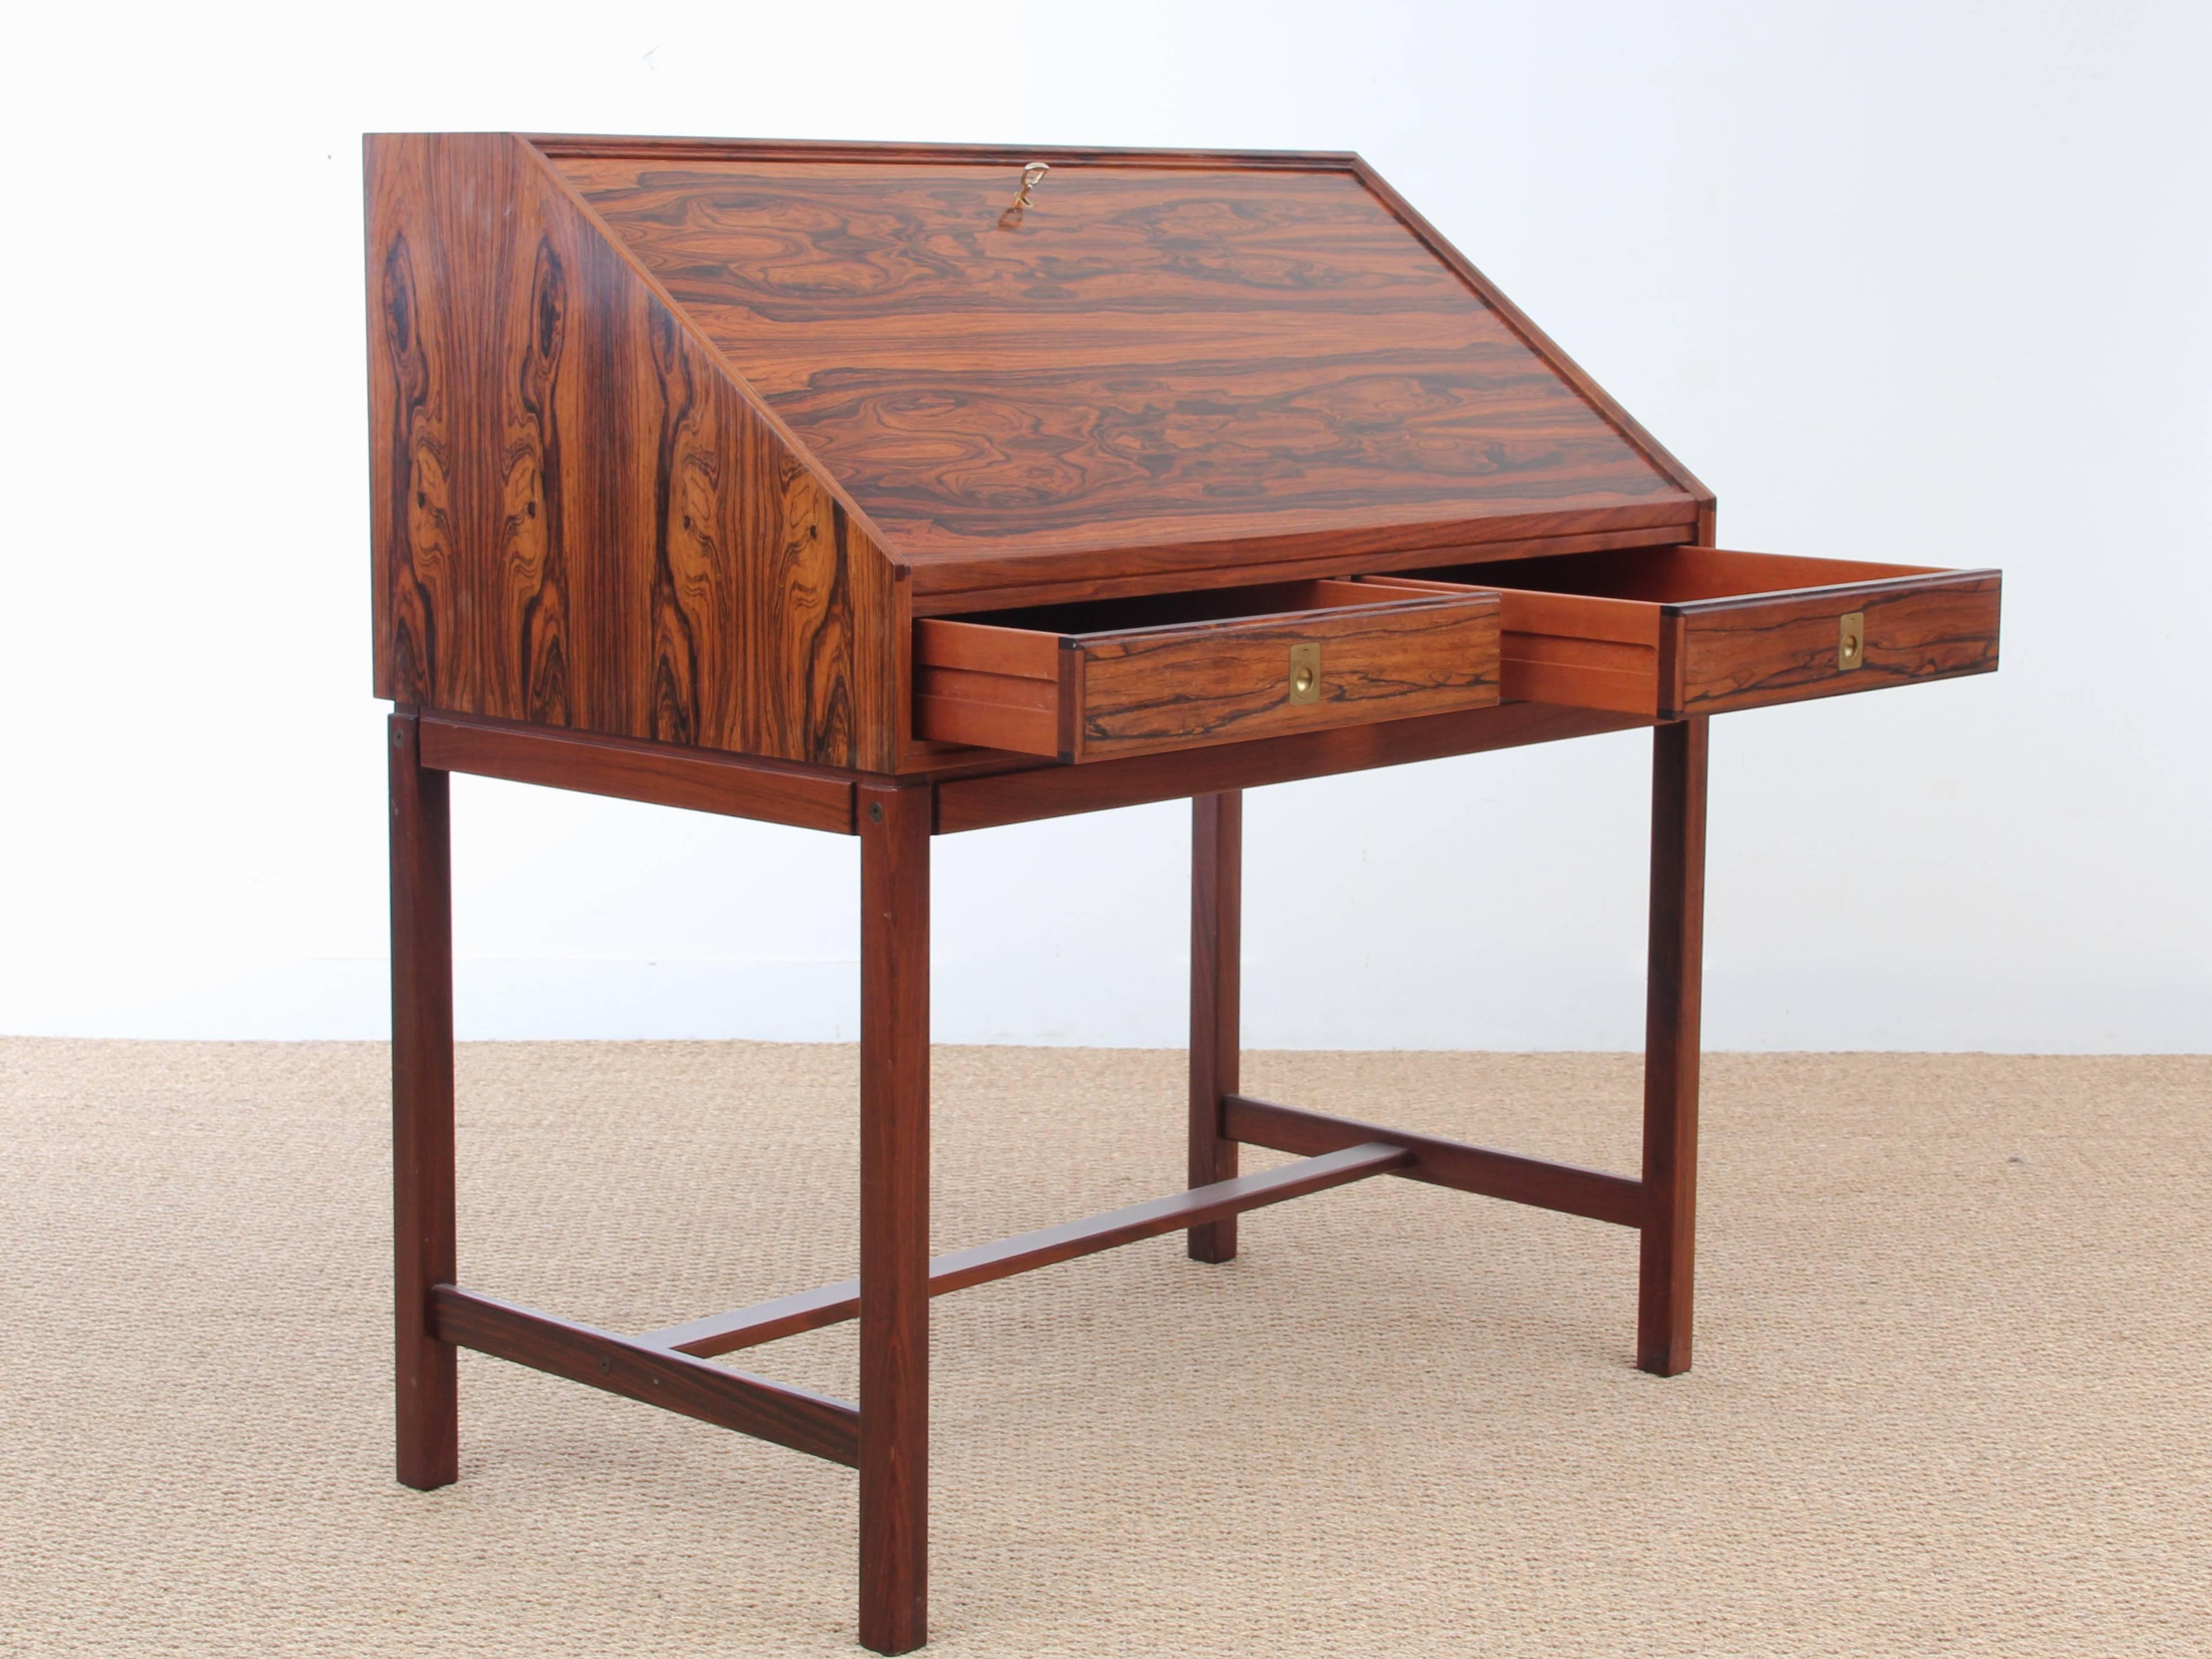 Mid-Century Modern Scandinavian writing desk of rosewood, front with two drawers and folding top, behind which shelves and drawers. Manufactured by Dyrlund. Exceptional original condition.